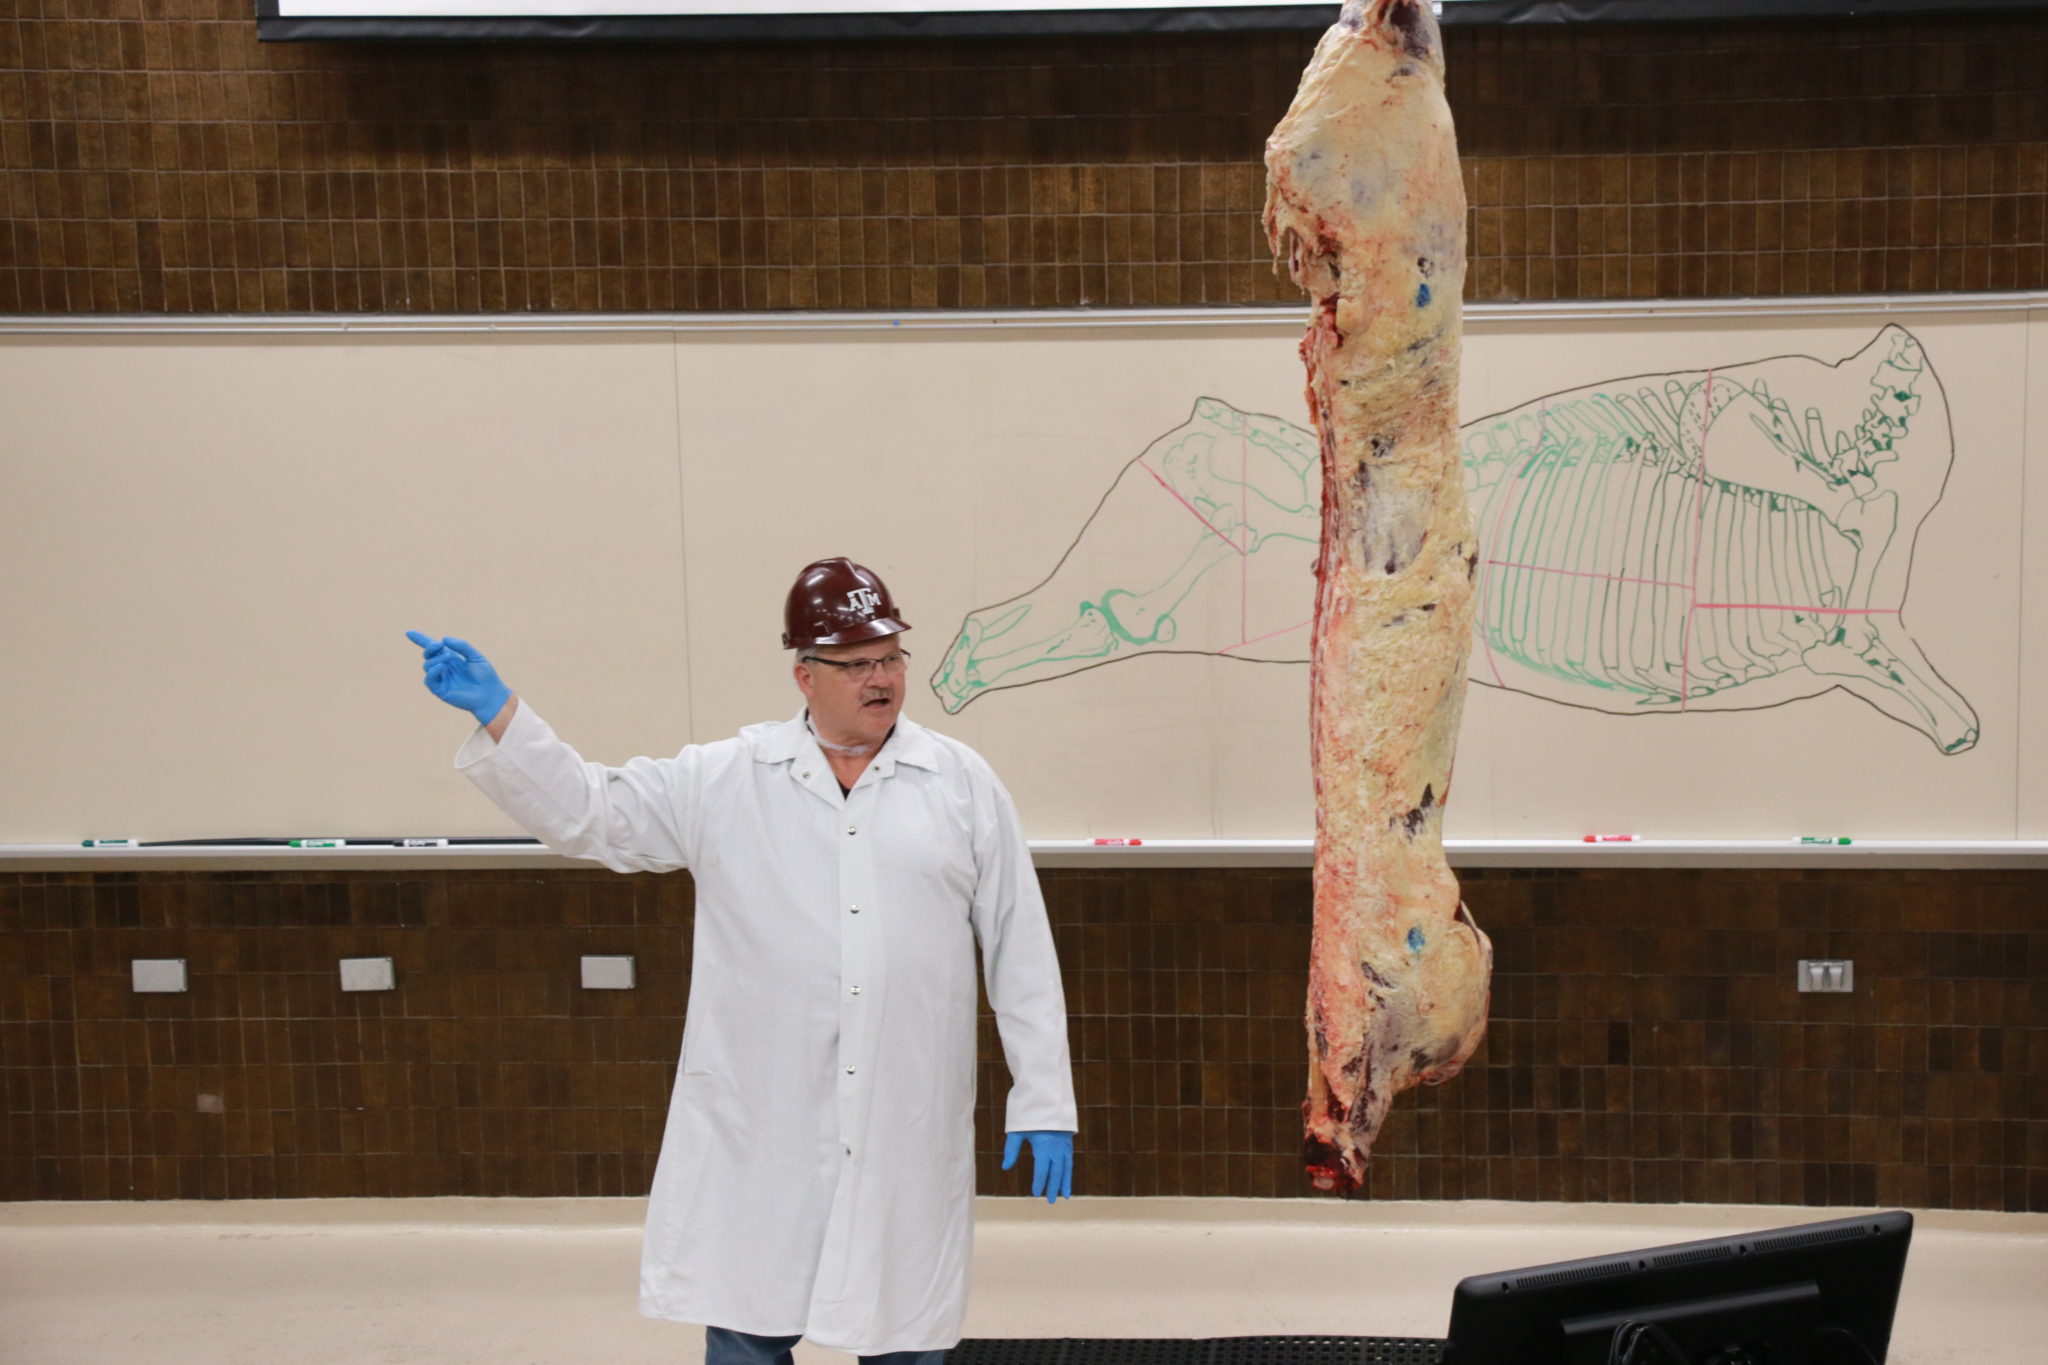 Davey Griffin talking about beef carcass anatomy